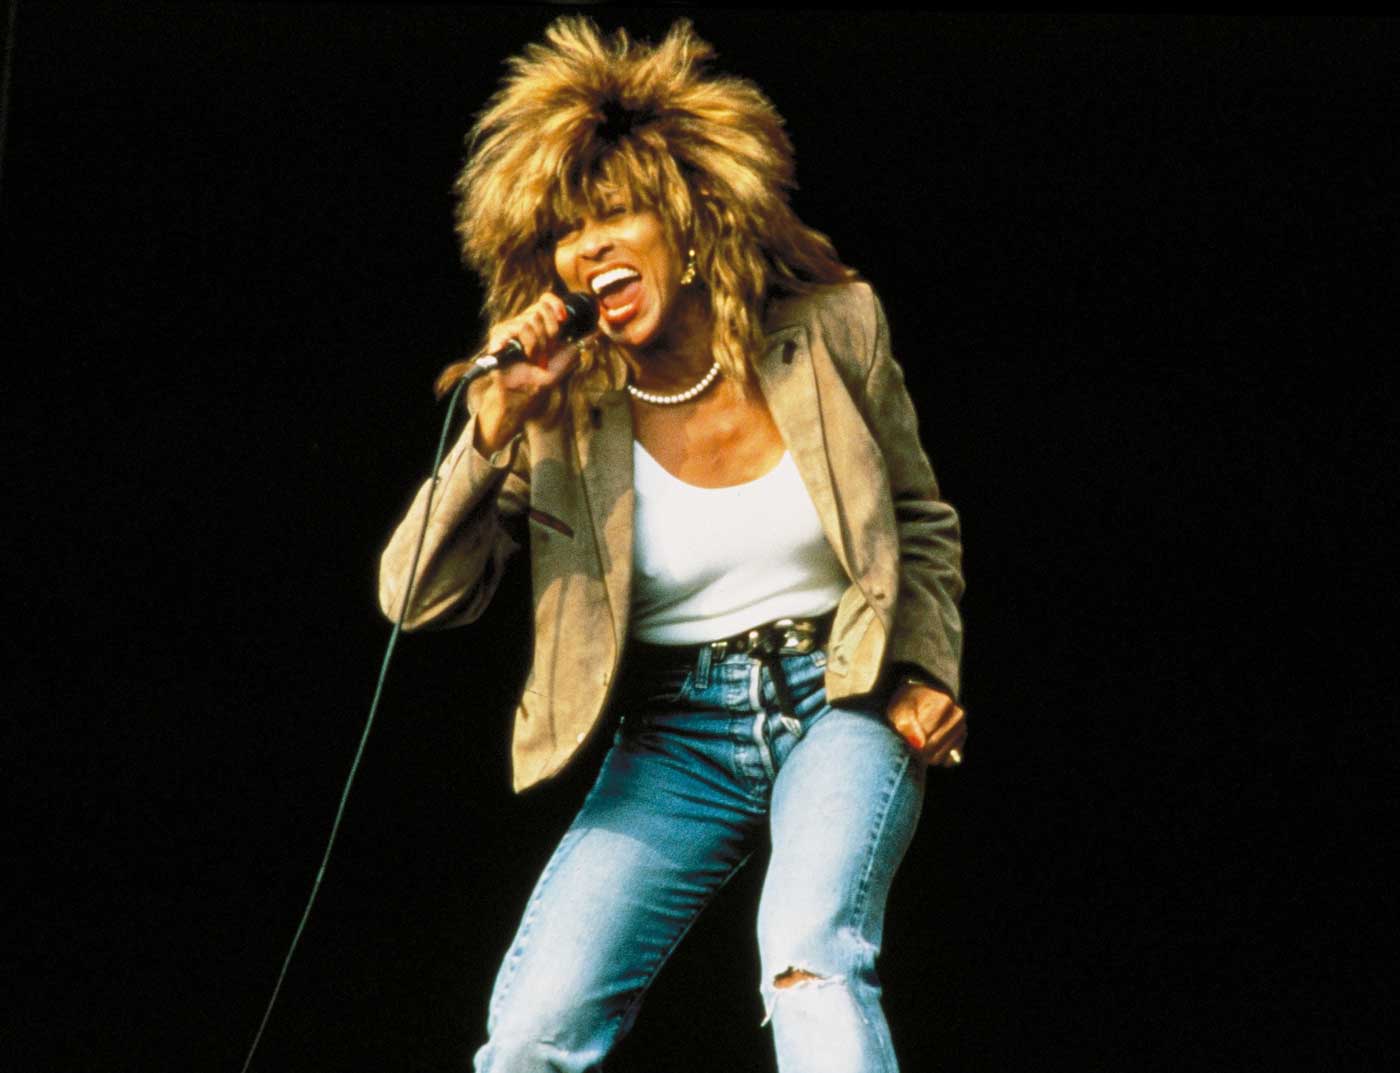 With a cover of Al Green’s Let’s Stay Together, Tina Turner created a stunn...